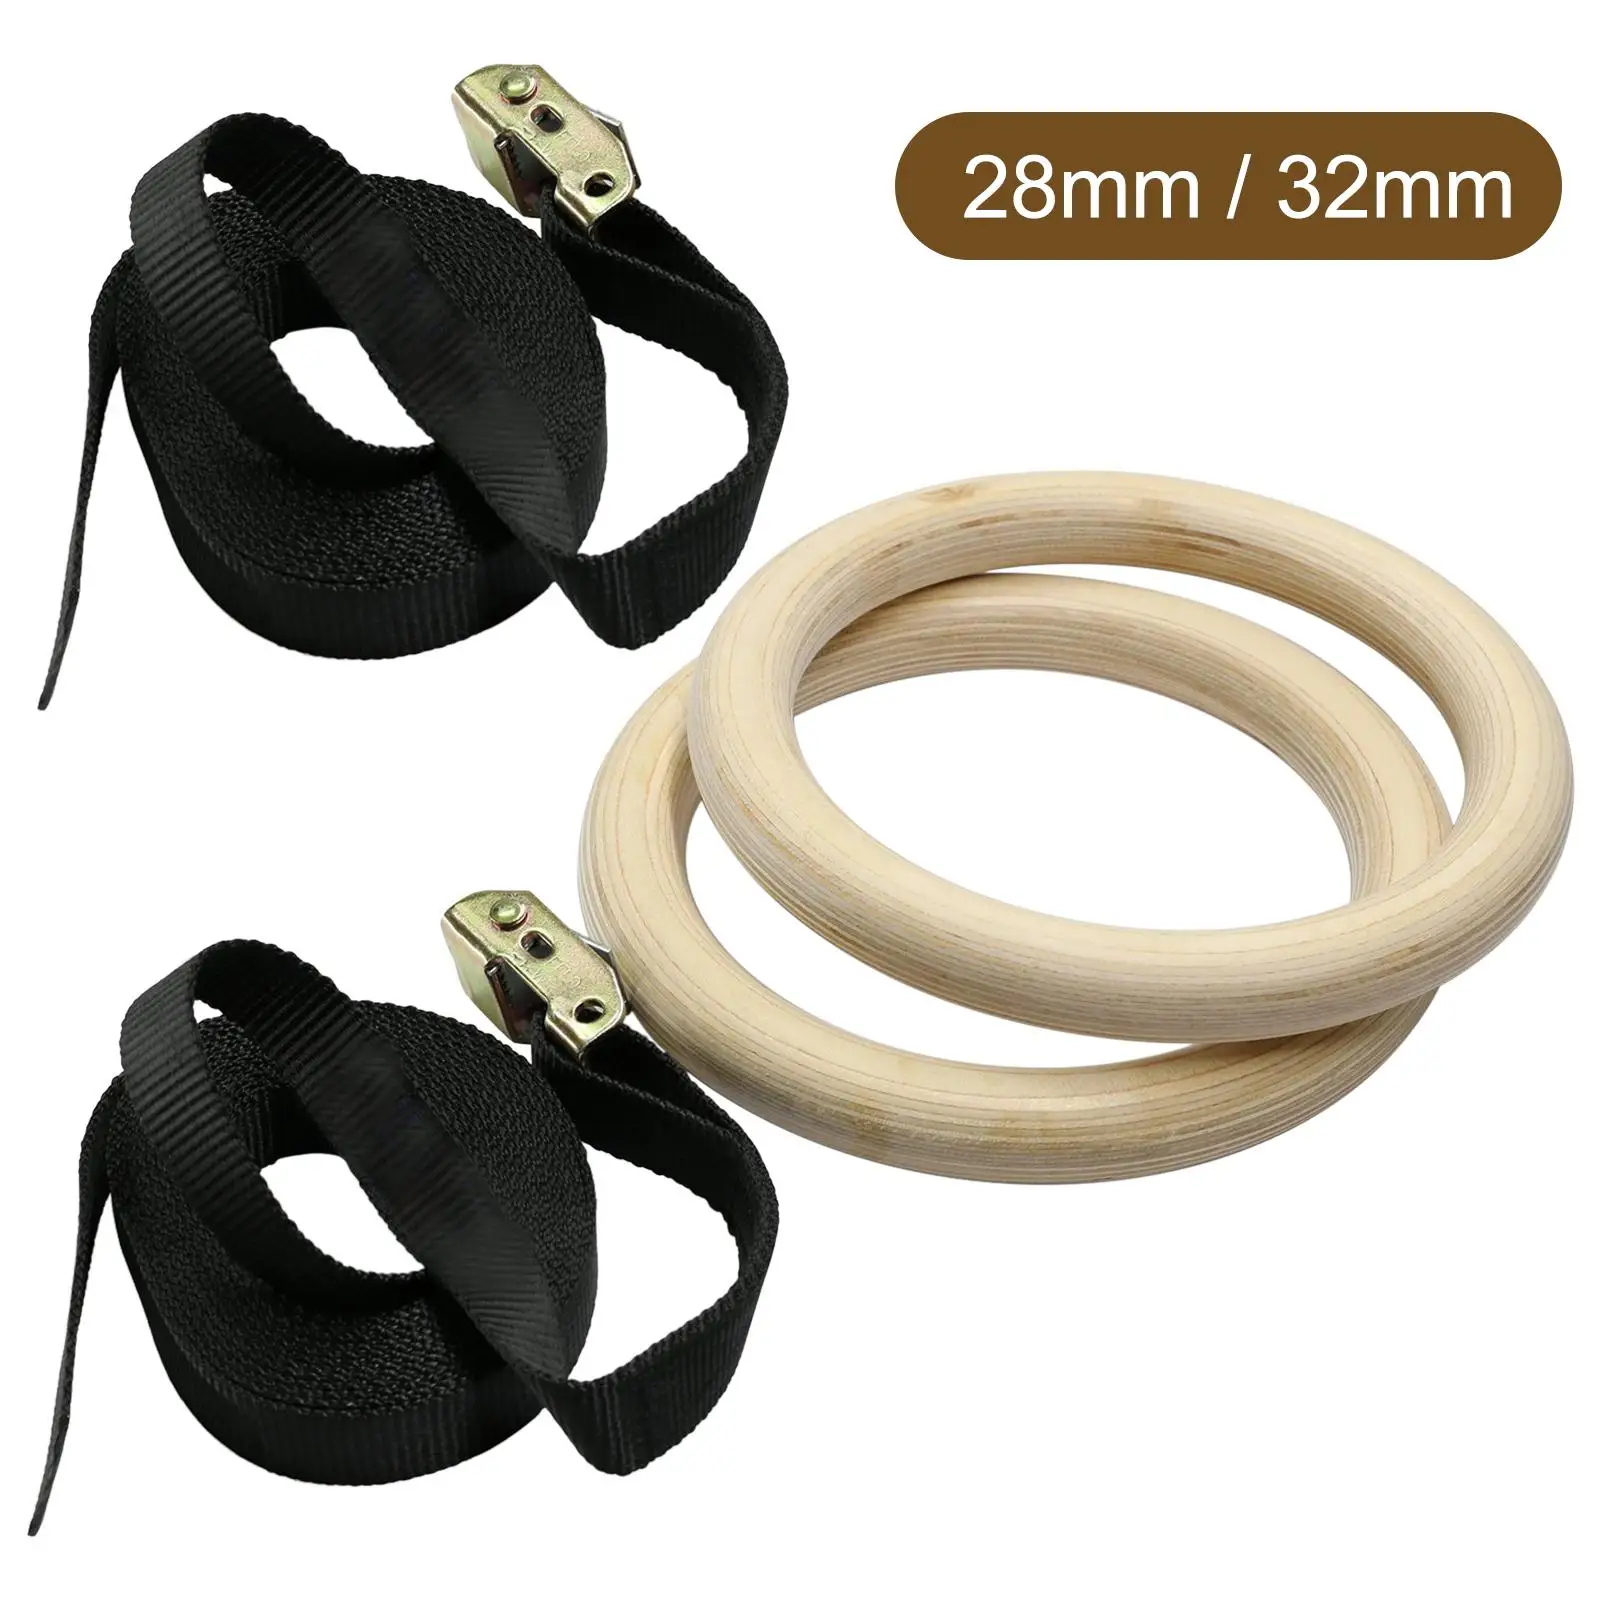 Gymnastics Rings with Buckle Heavy Duty 14.76ft Long Straps Adjustable Training Equipment for Full Body Workout Fitness Home Gym